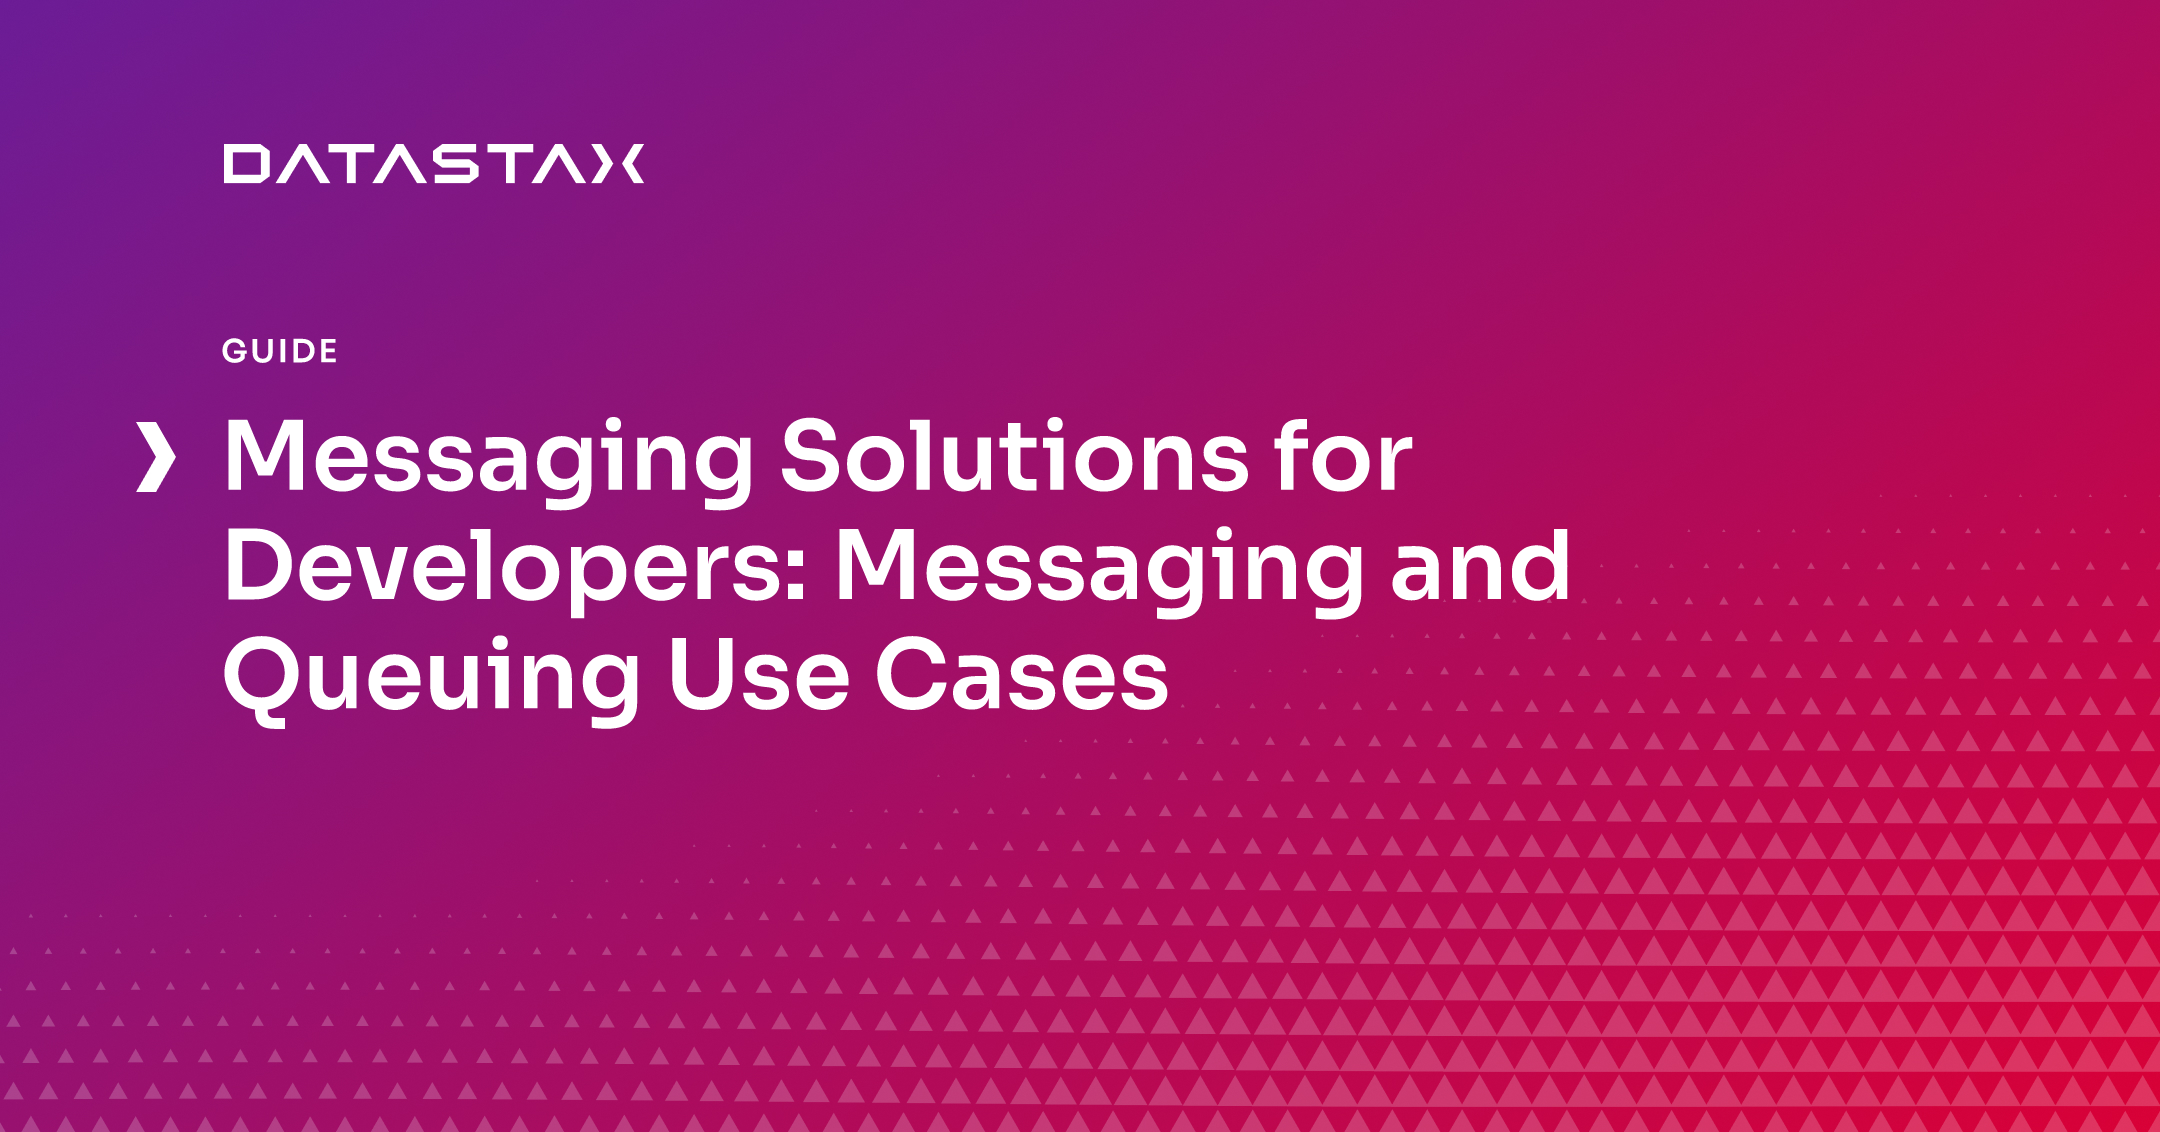 Messaging Solutions for Developers: Messaging and Queuing Use Cases